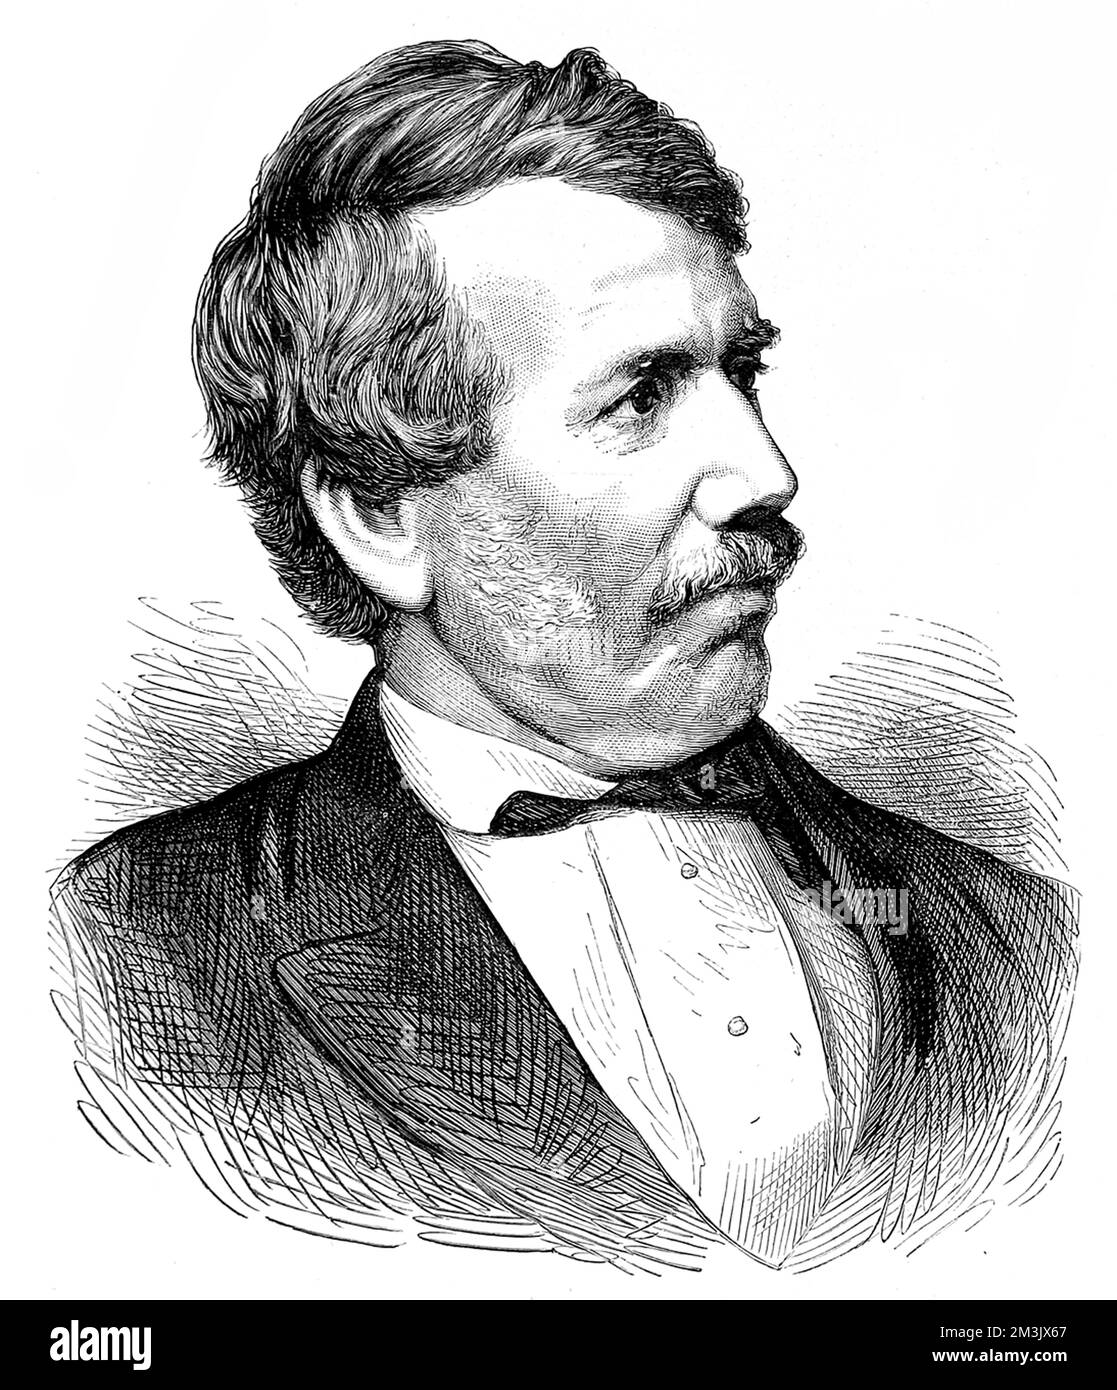 Dr. David Livingstone (1813 - 1873), Scottish missionary and explorer, published in 1870. The discoverer of Victoria Falls, his extensive explorations of Central Africa were chiefly driven by the strength of his missionary ideals. He died in Zambia in 1873, while searching for the source of the Nile.     Date: 1870 Stock Photo